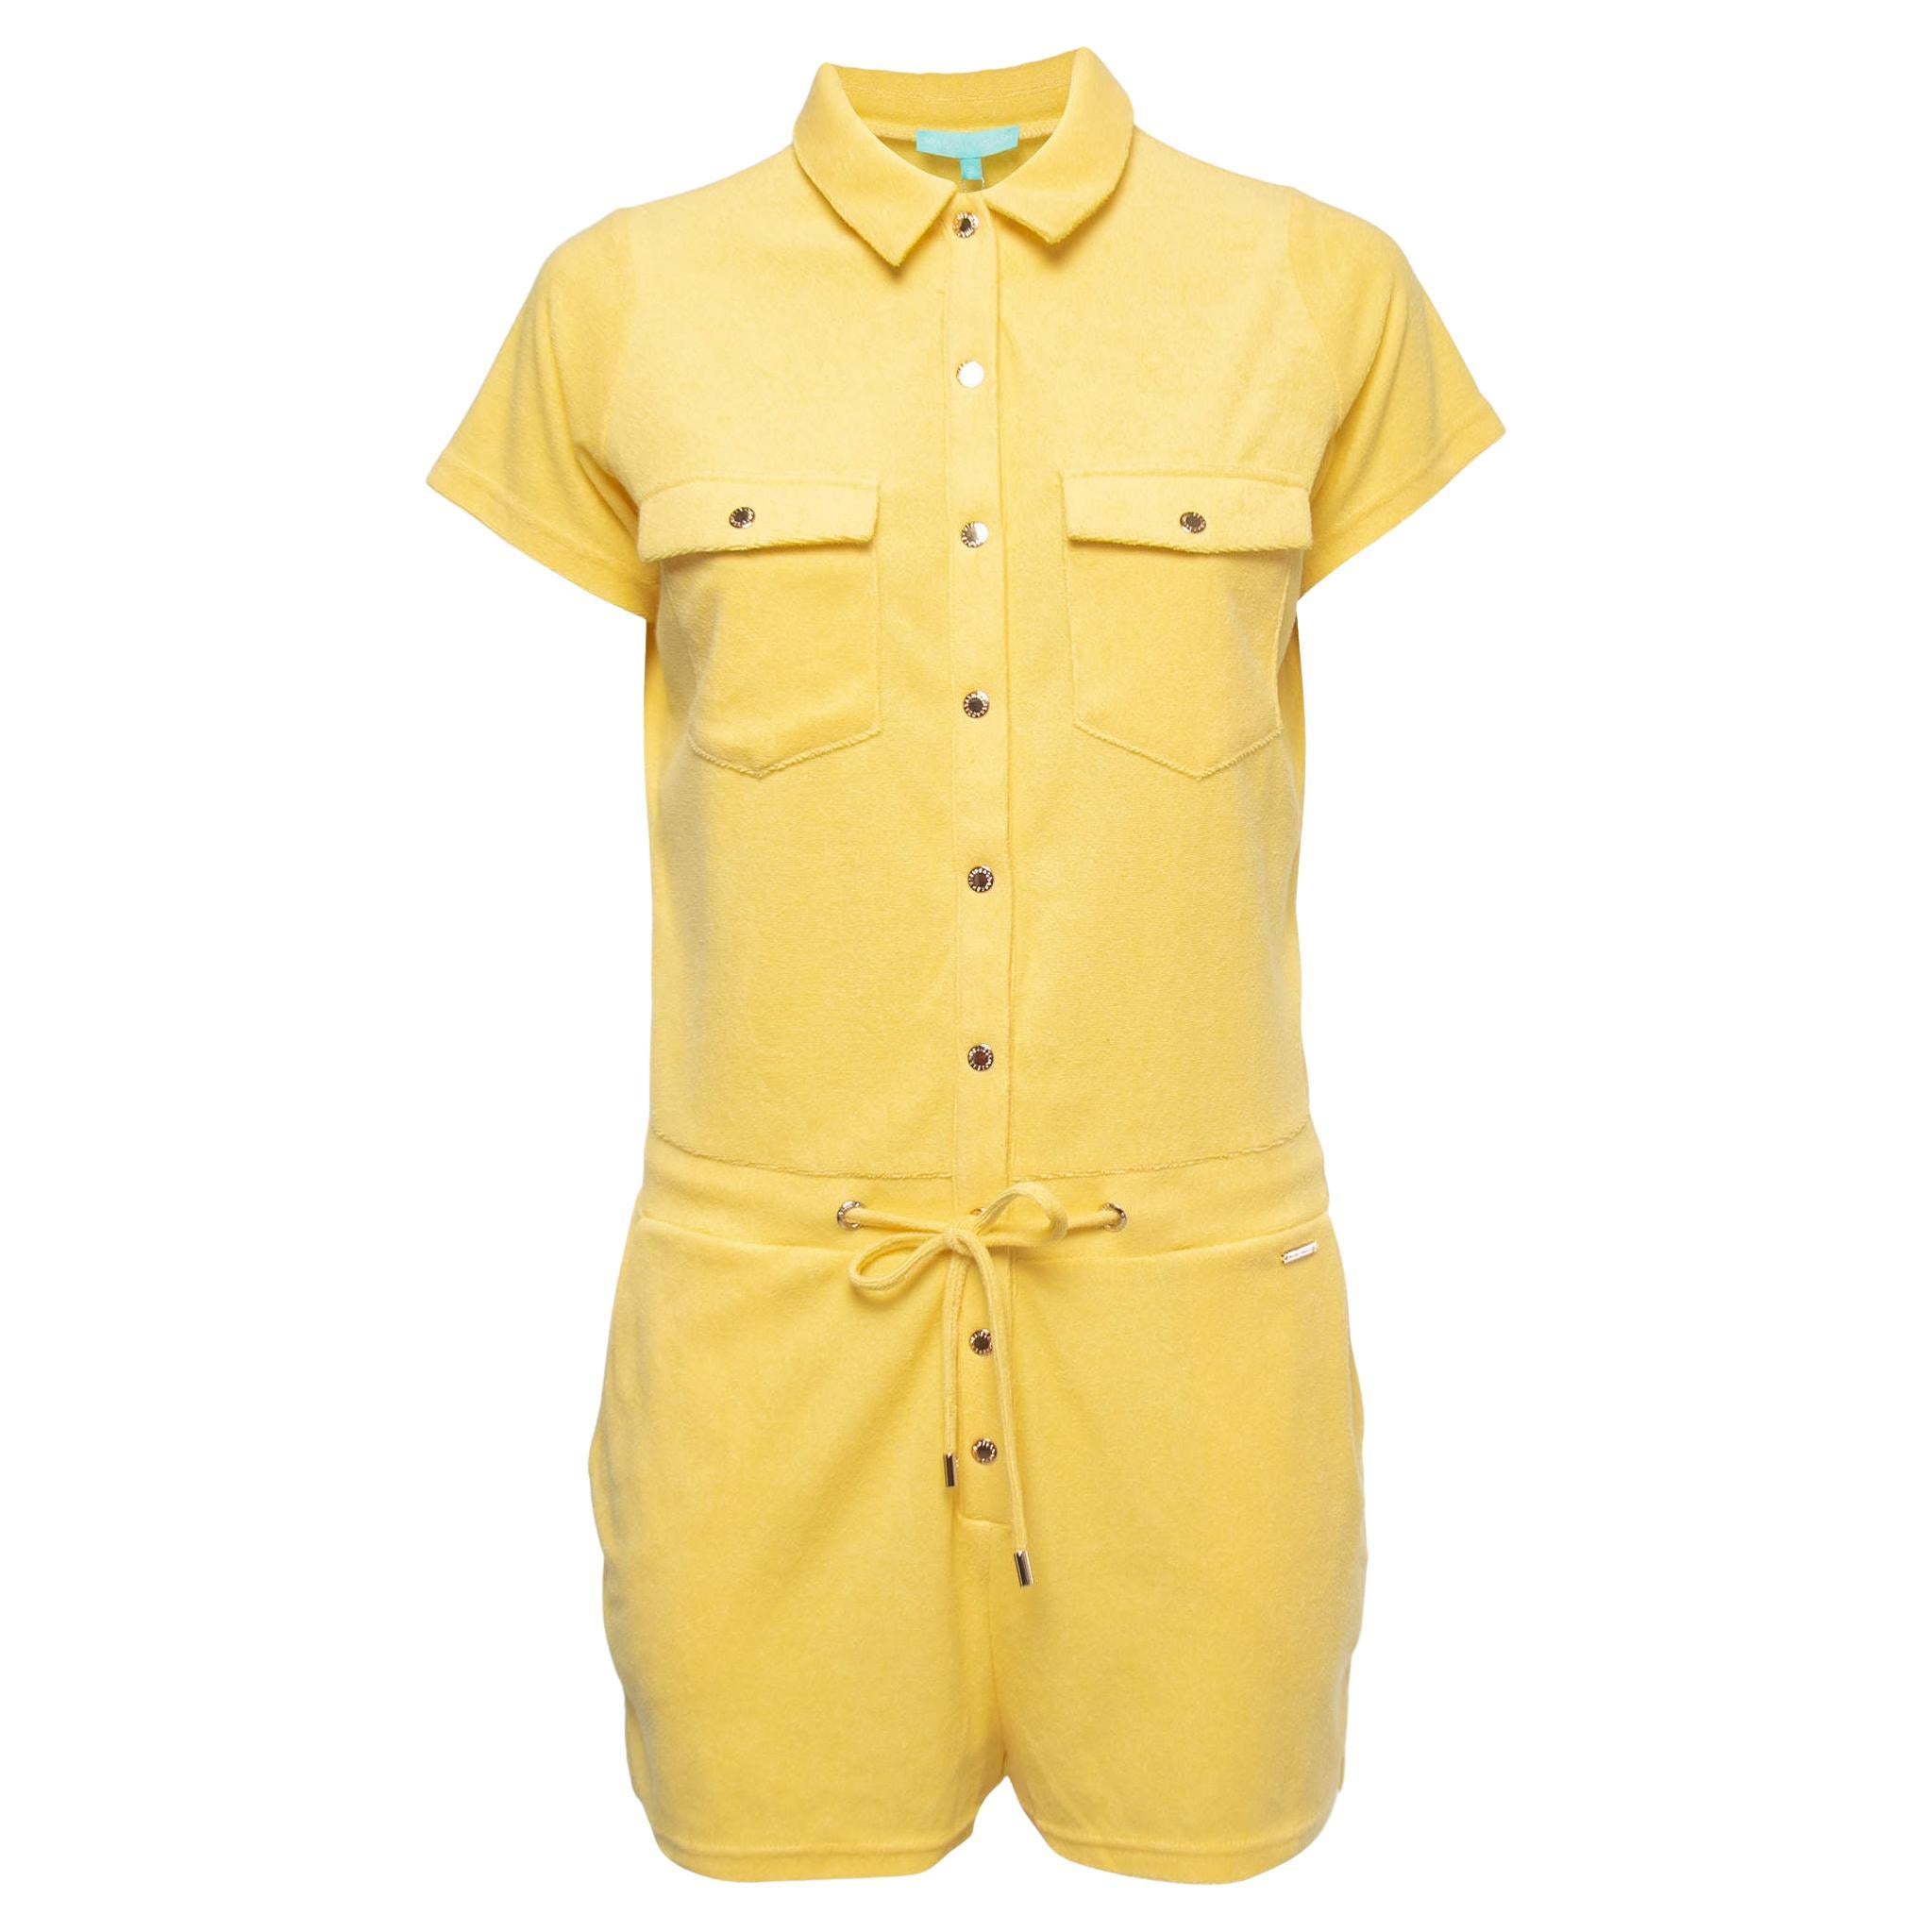 Melissa Odabash Yellow Terry Playsuit S For Sale